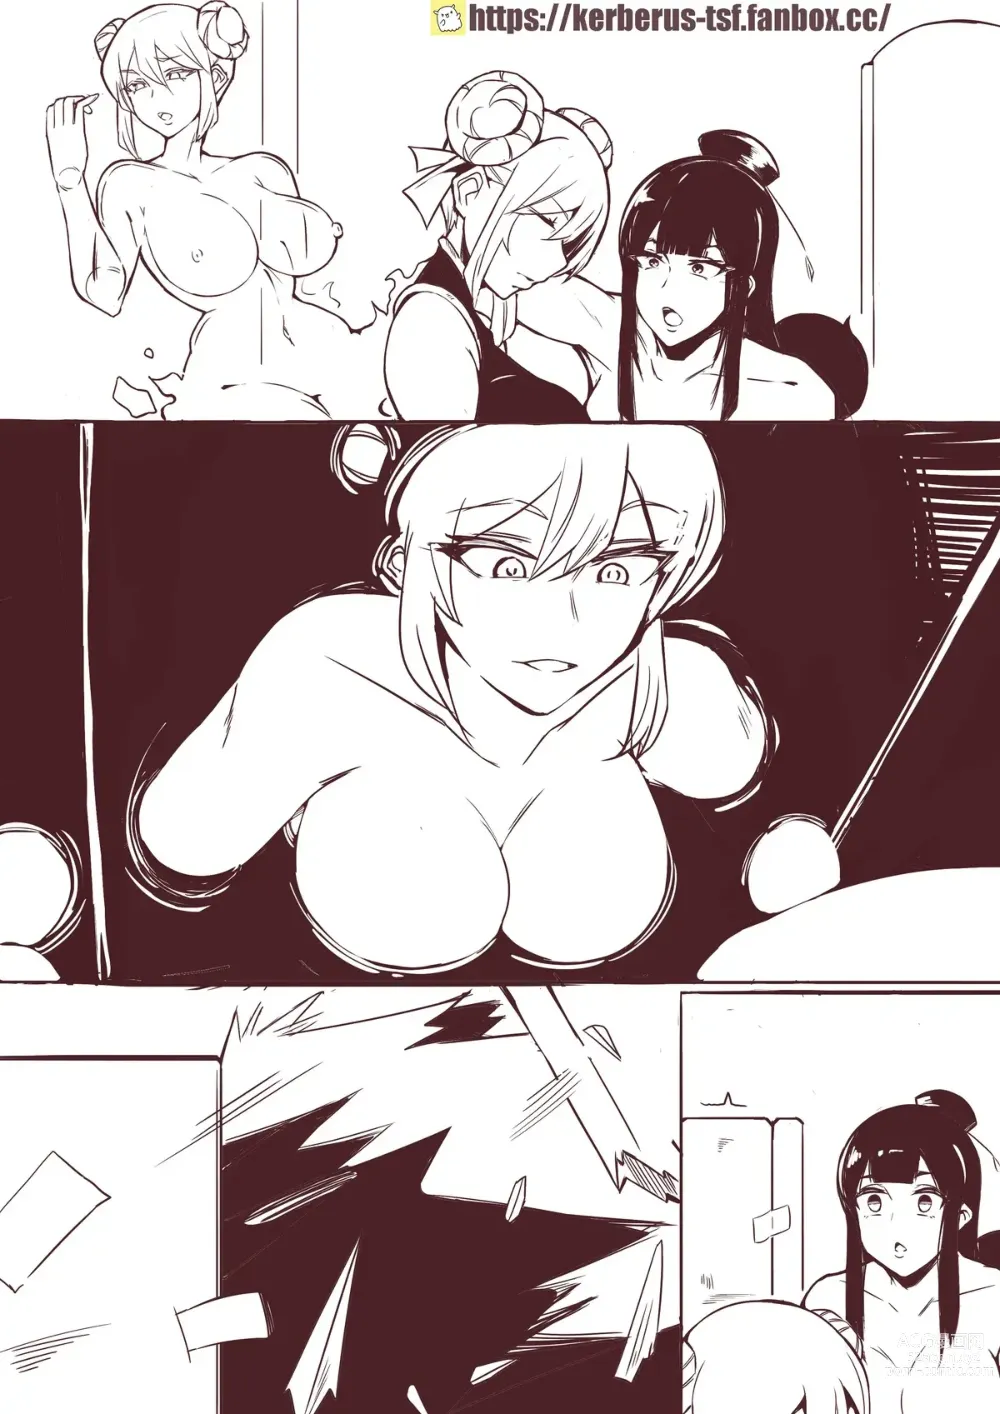 Page 3 of doujinshi Kerberus 魂灵符咒2 Soul Spell 2 [憑依 入れ替わり11P] Possession Bodyswap